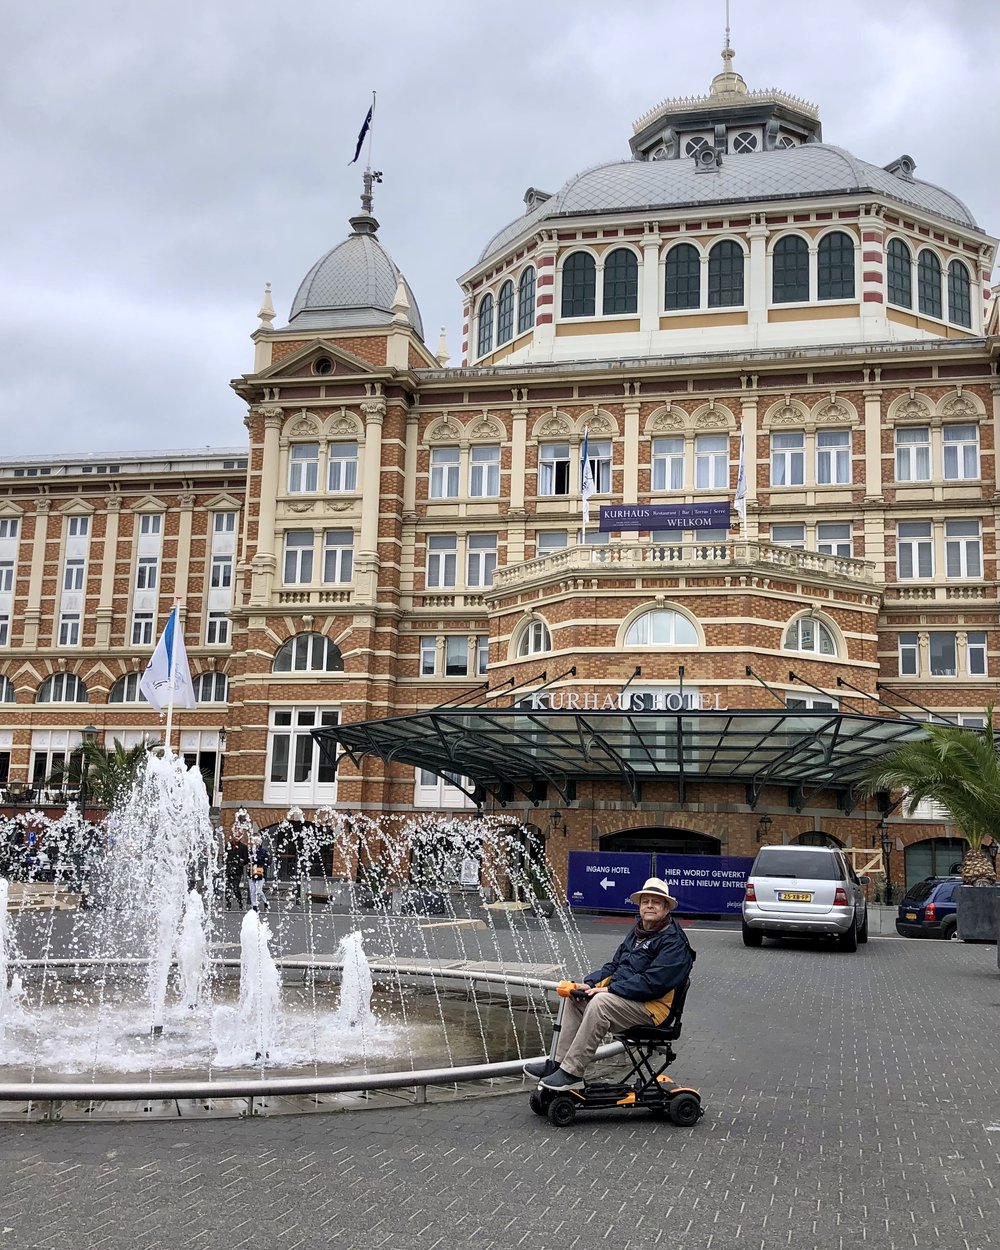 The “Kurhaus" is always an opportunity for a photo.